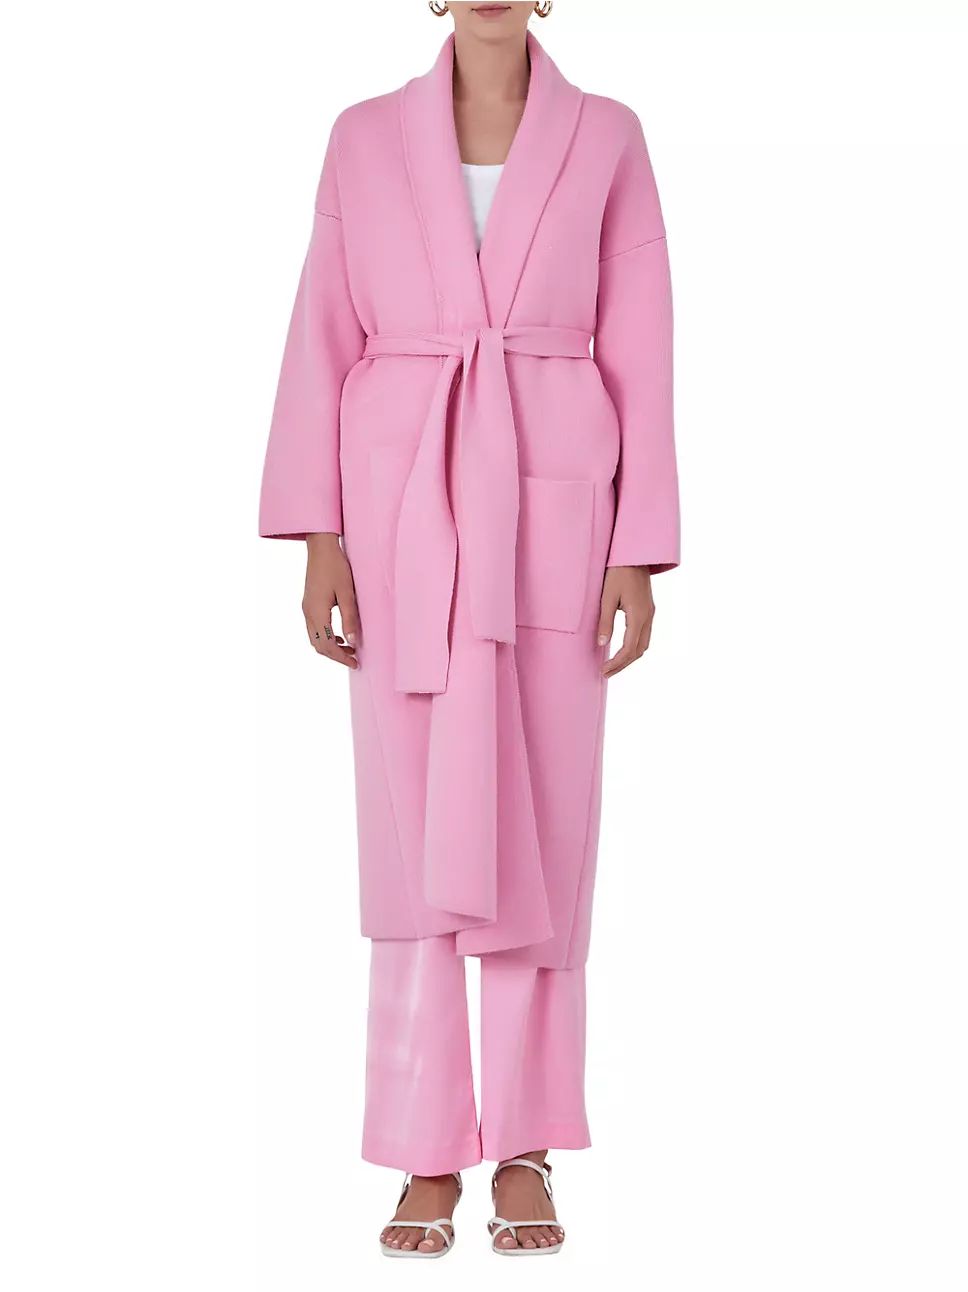 Endless Rose


Shawl Collar Oversized Long Cardigan



3.8 out of 5 Customer Rating | Saks Fifth Avenue